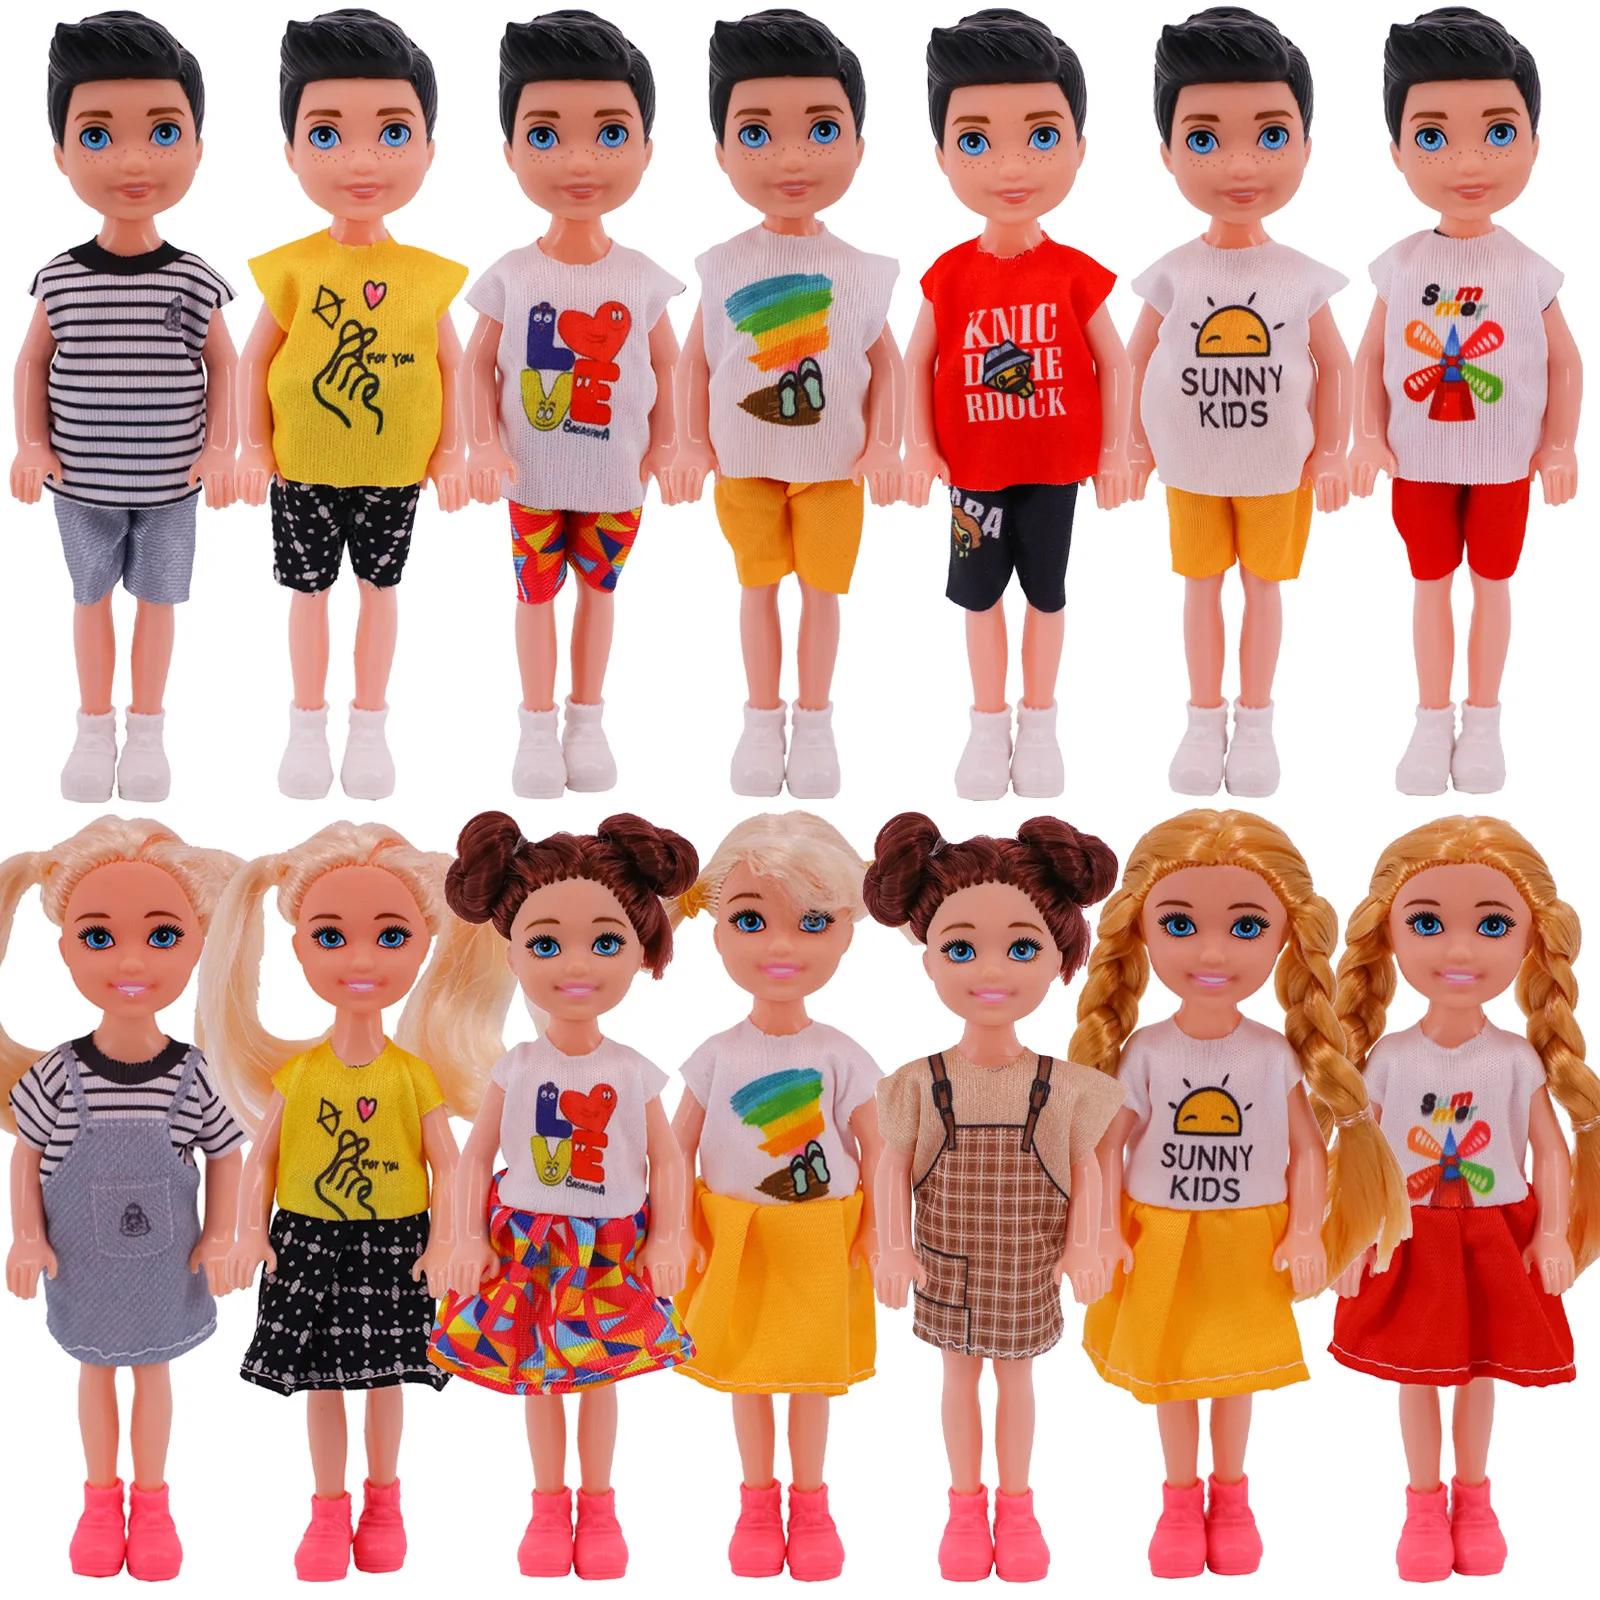 Doll Clothes For Kelly Dolls Handmade Fashion Dress T-shirts Shorts Accessories Fit 5Inch Dolls,12CM Kelly Doll,Our Generation 10 pcs princess doll fashion outfit handmade daily t shirt shorts clothes for barbie doll noble dinner party dress accessories